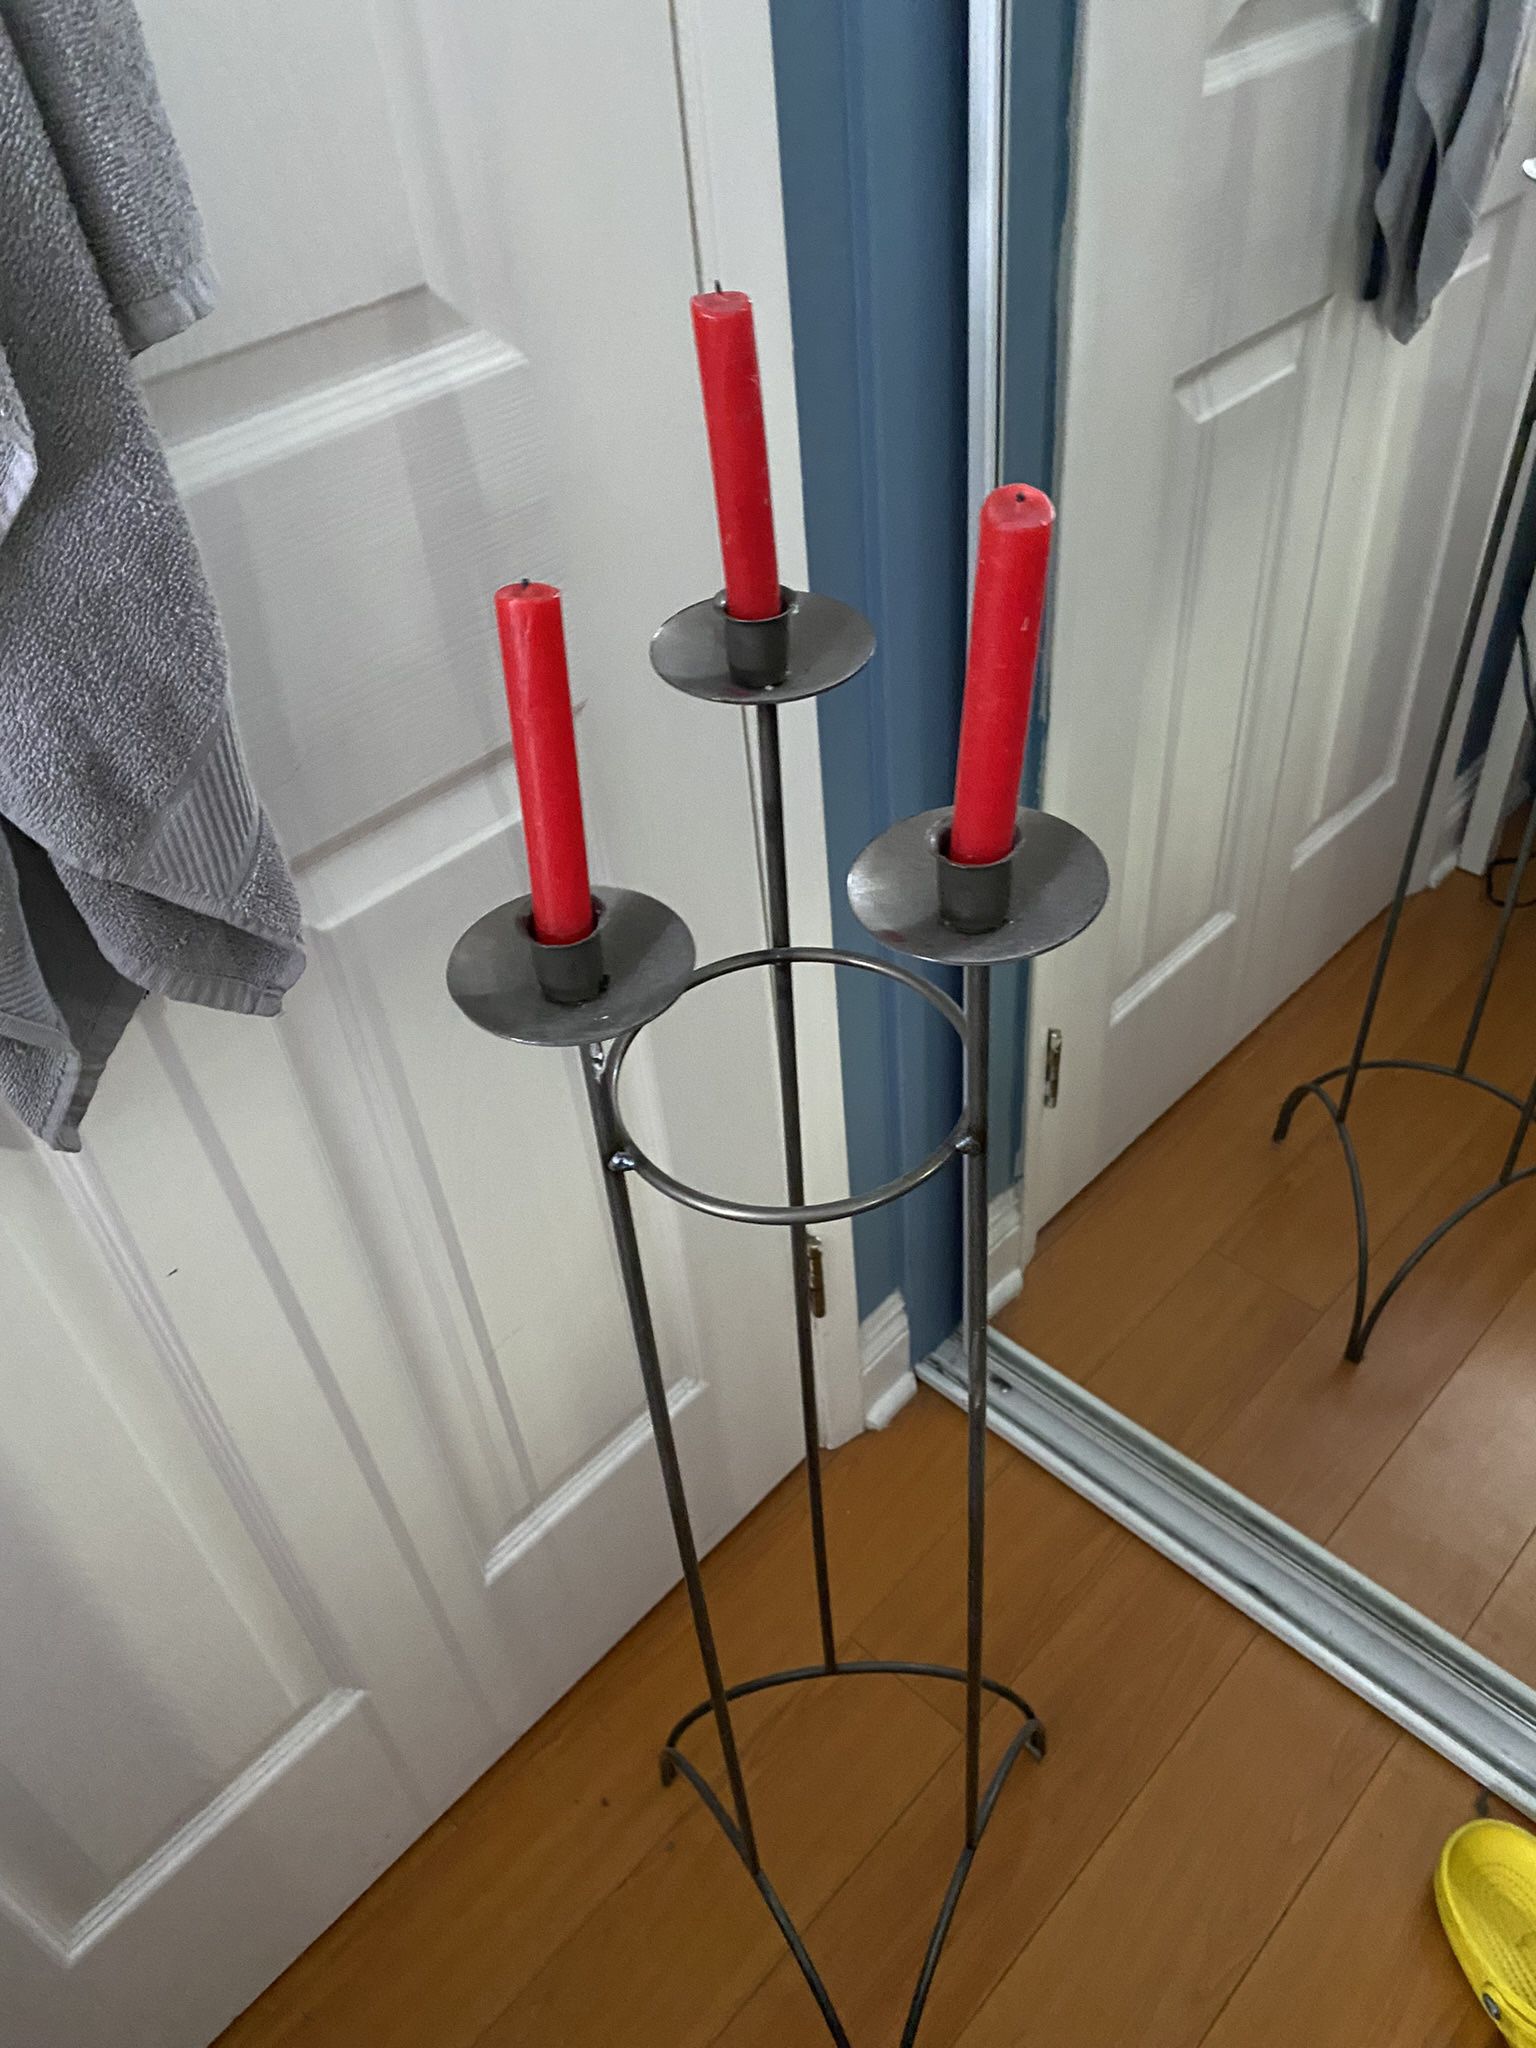 3 Tier Candle Holder 